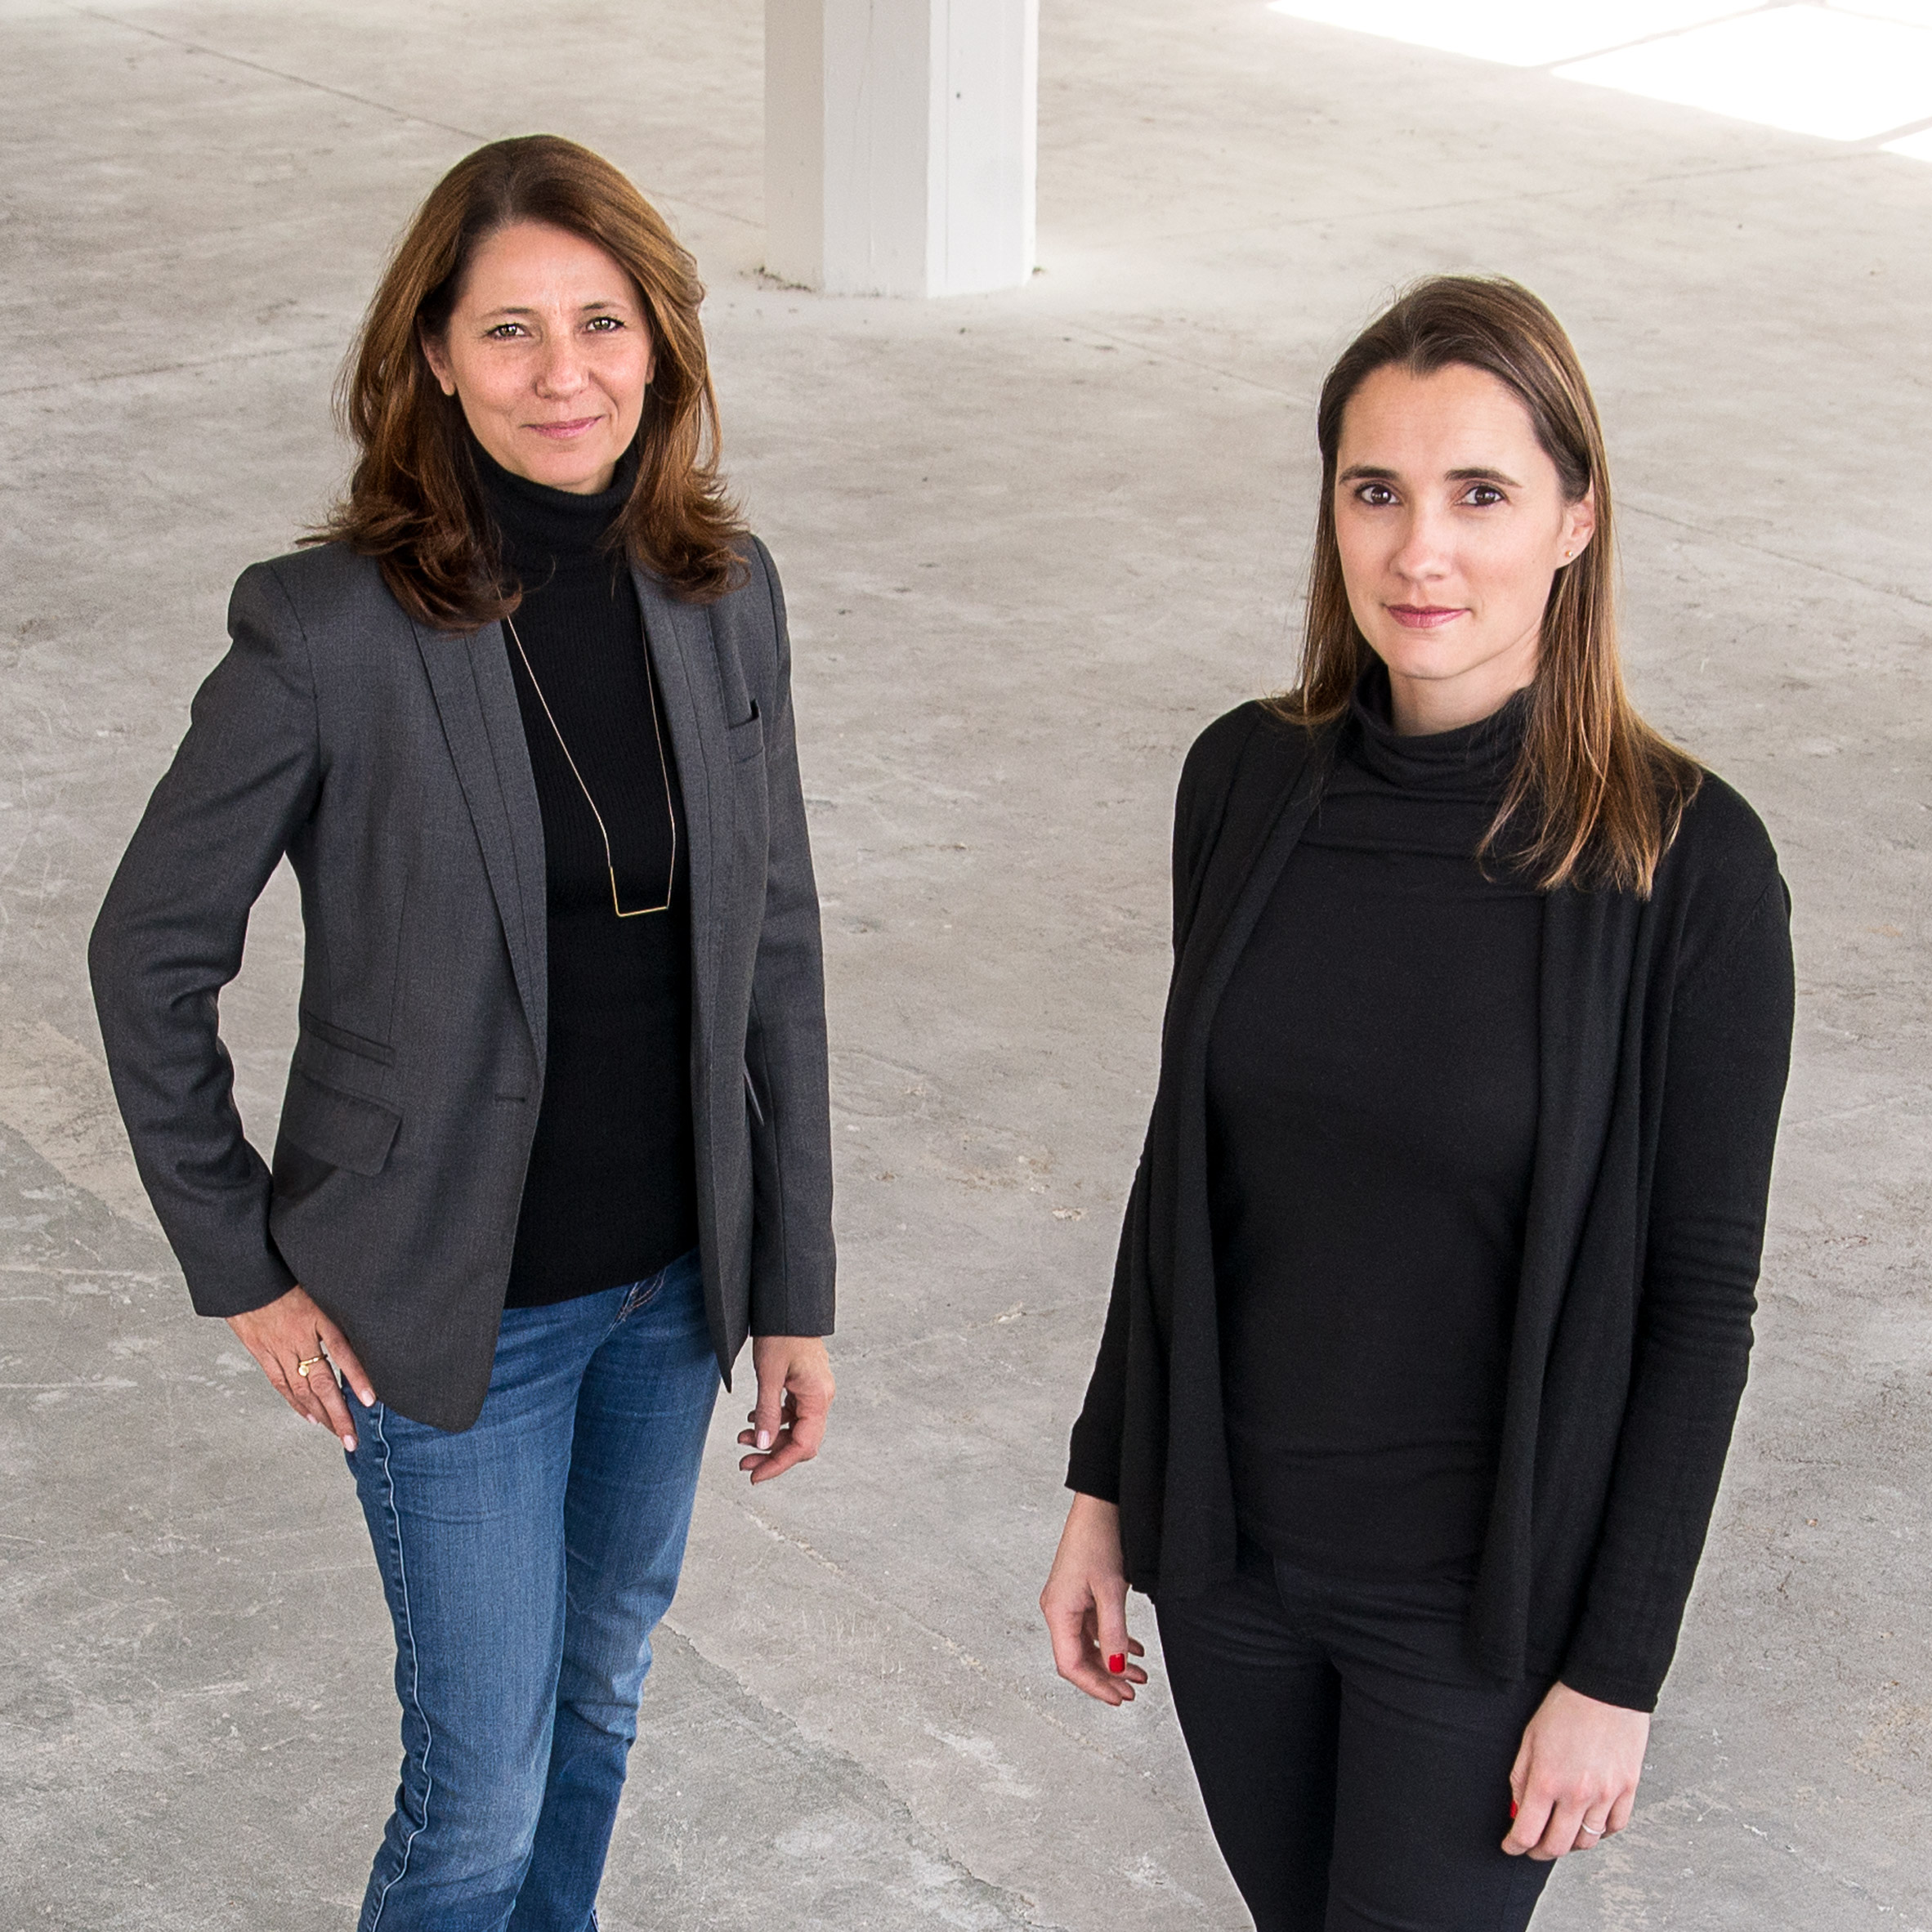 Co-founders of New York design fair WantedDesign, Odile Hainaut and Claire Pijoulat